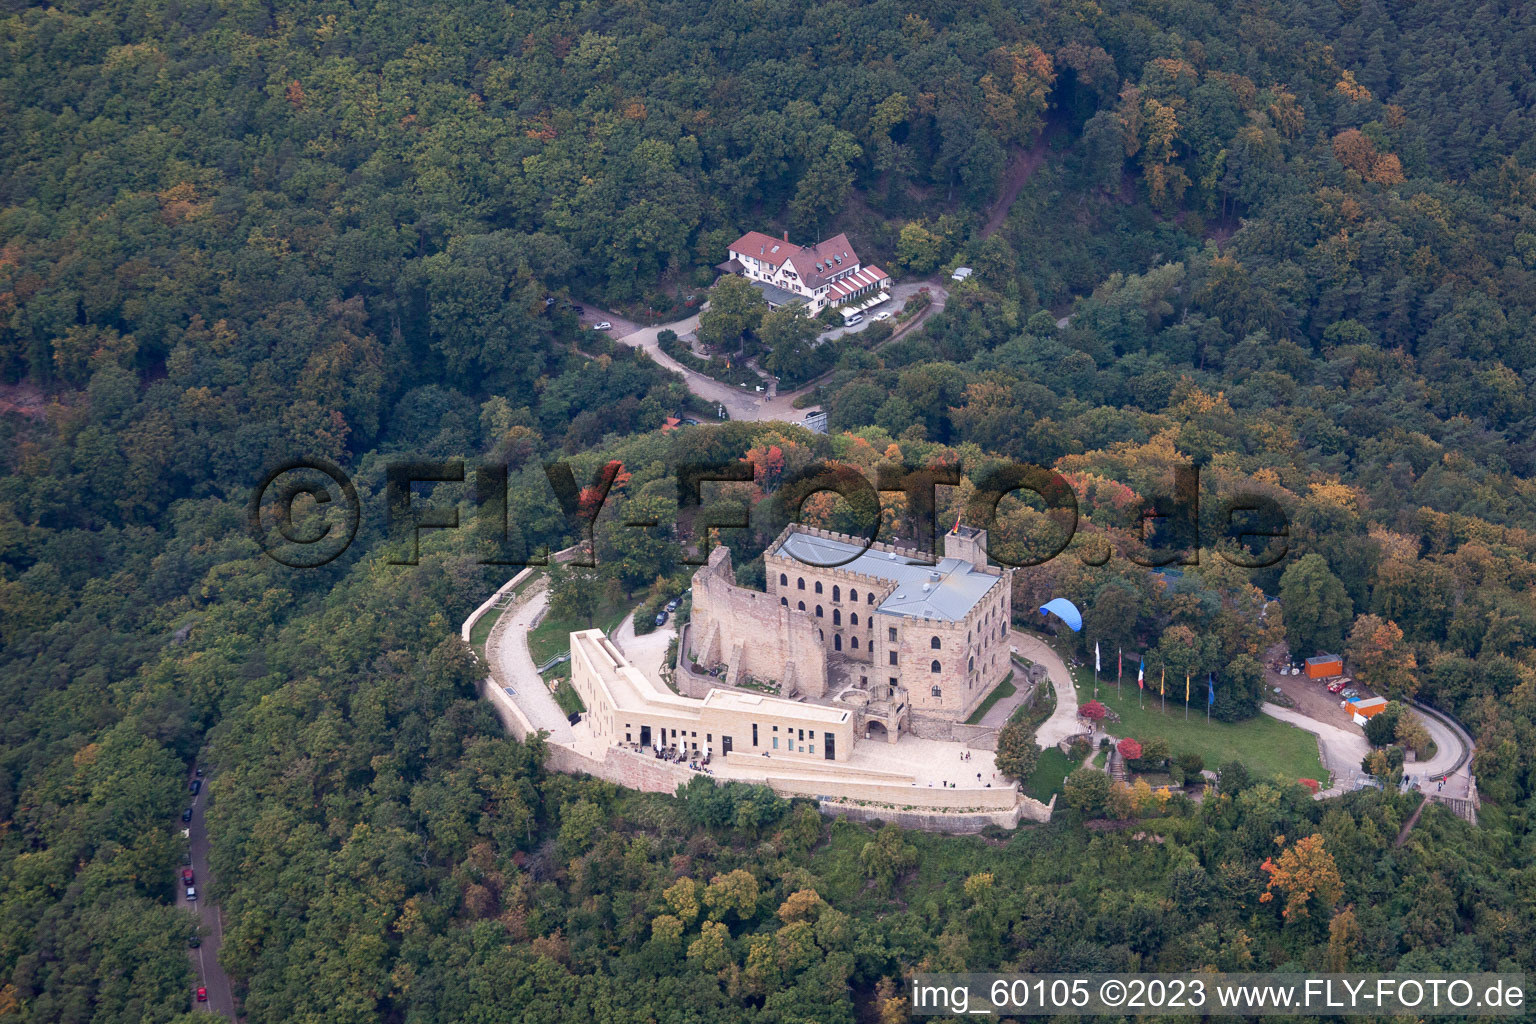 Hambach Castle in the district Diedesfeld in Neustadt an der Weinstraße in the state Rhineland-Palatinate, Germany from the drone perspective